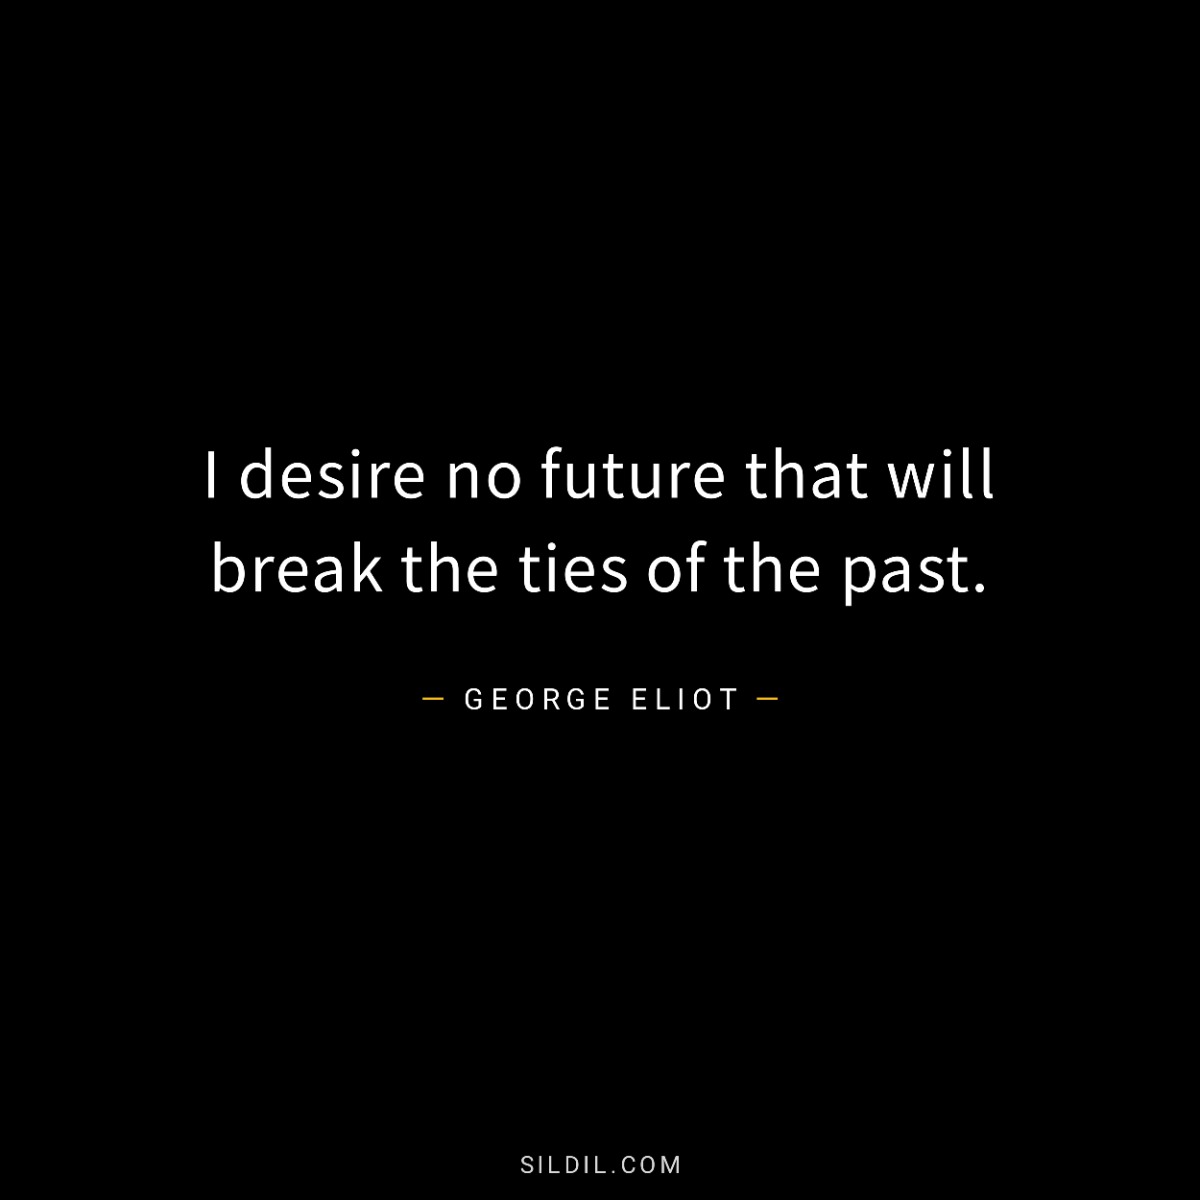 I desire no future that will break the ties of the past.